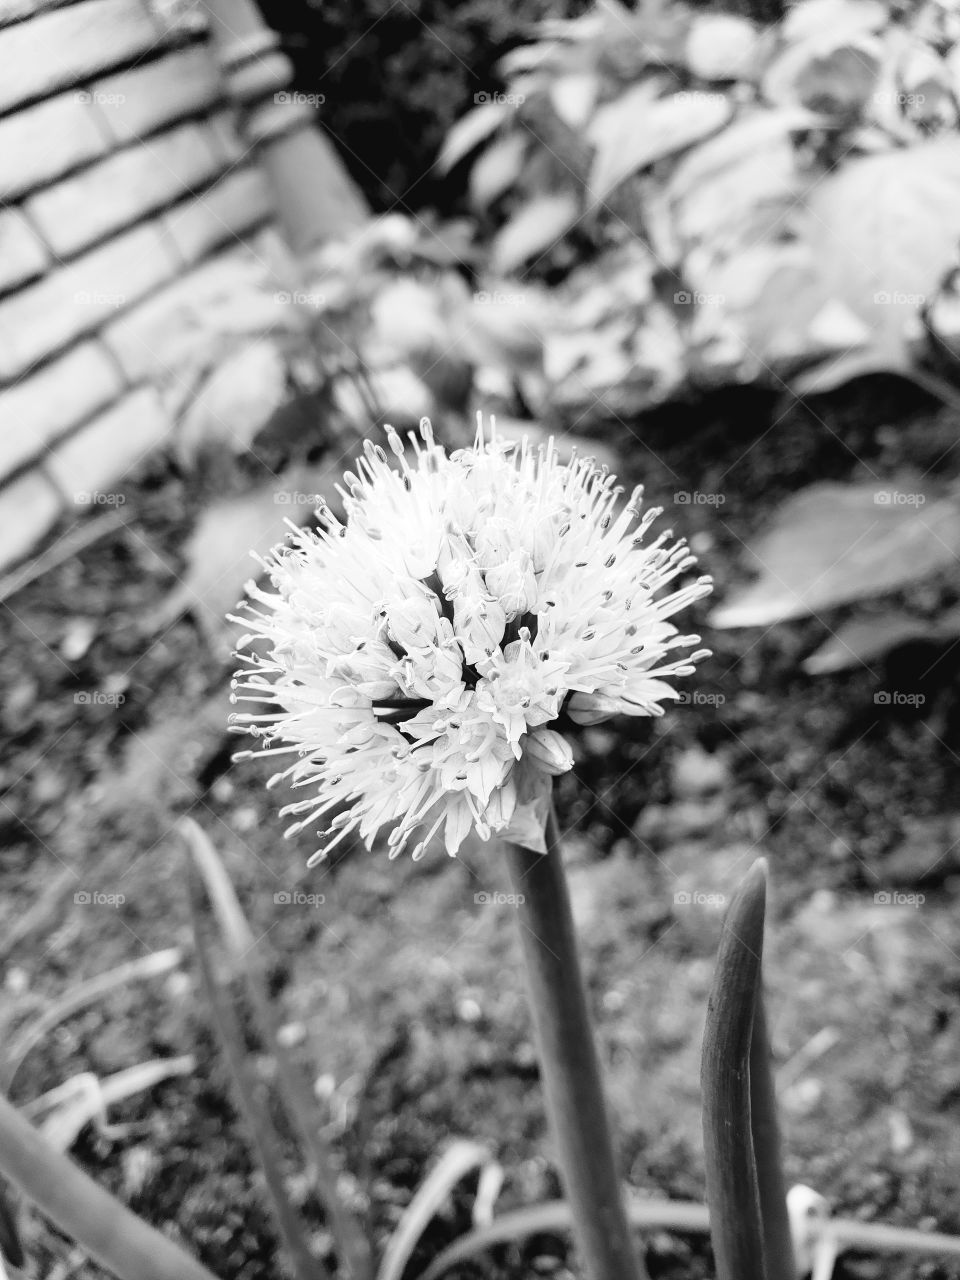 A beautiful bloom produced by a simple onion plant.